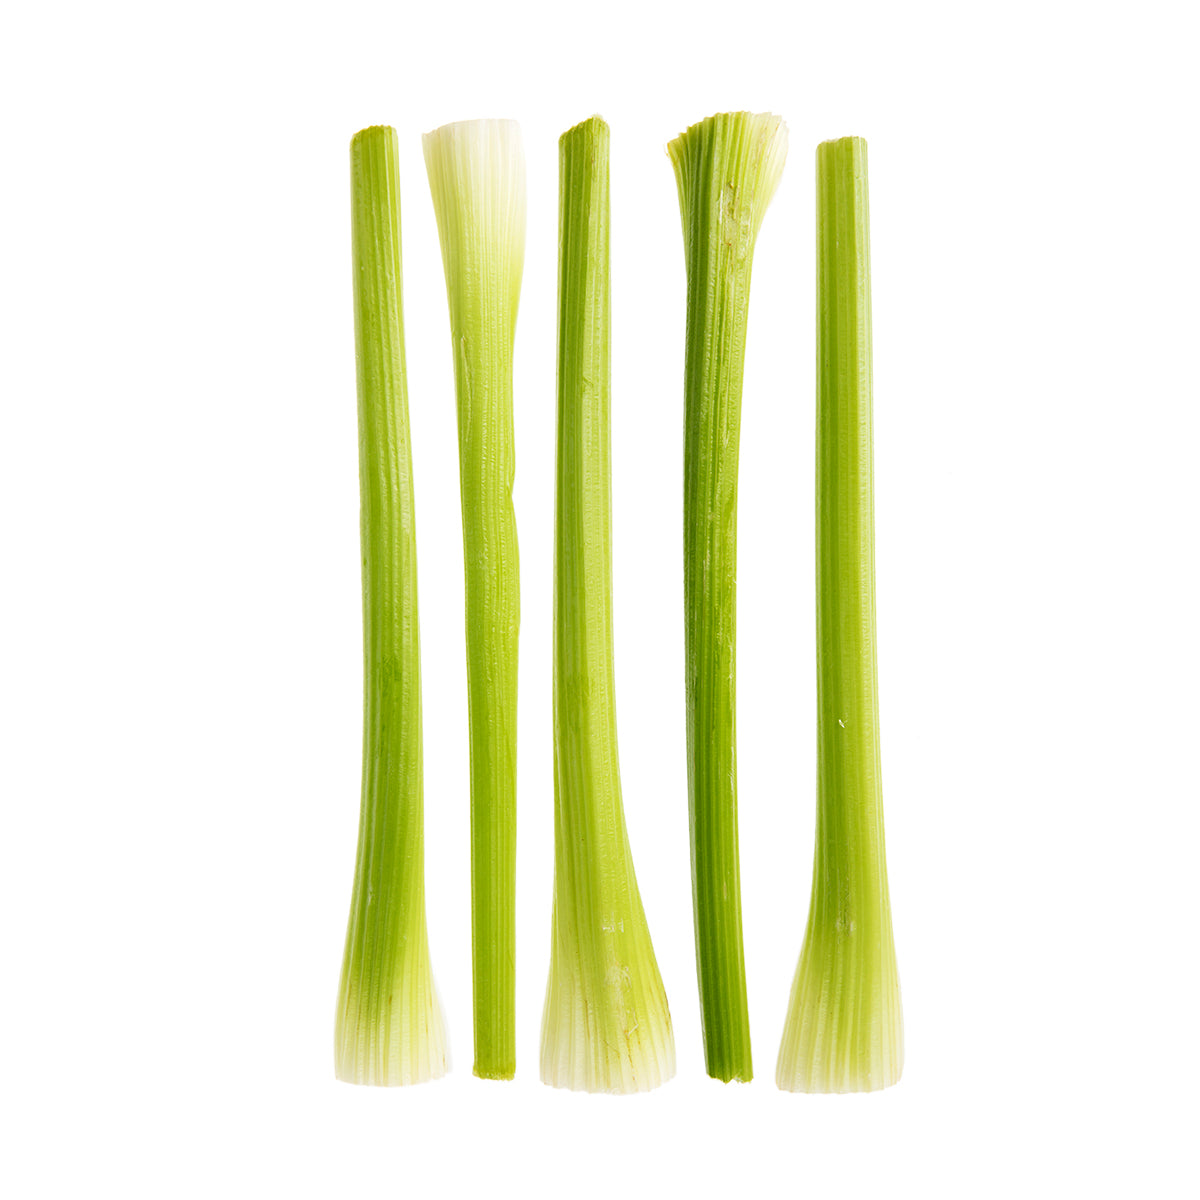 BoxNCase Trimmed and Washed Celery 10 LB